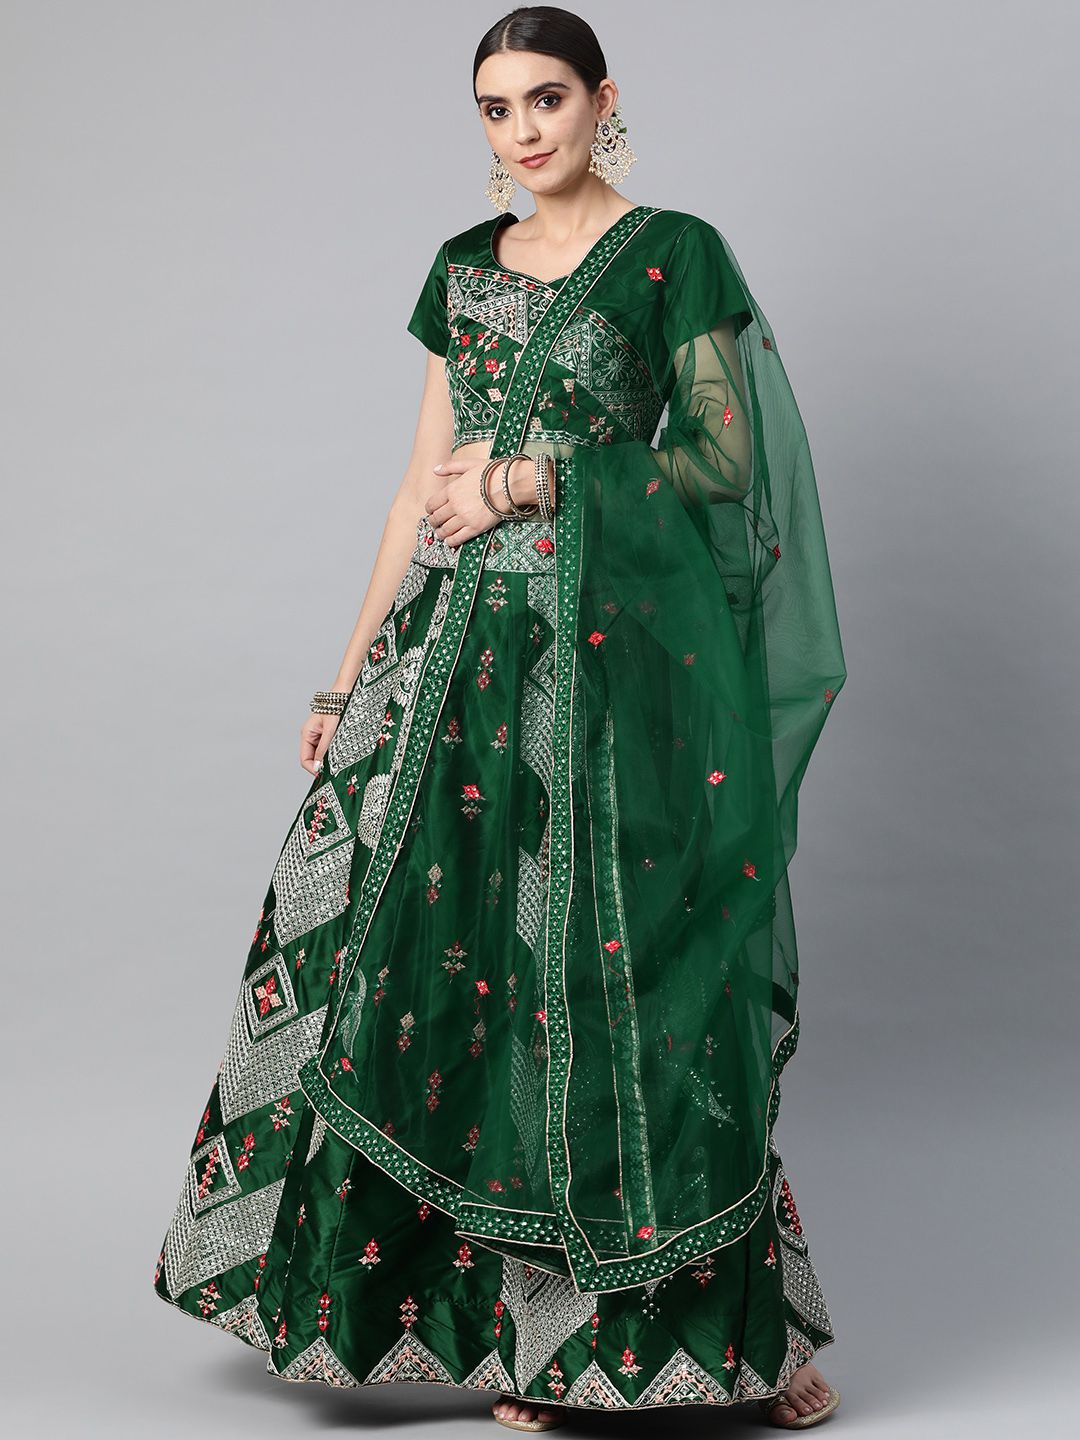 Readiprint Fashions Green & Silver-Toned Embroidered Sequinned Unstitched Lehenga & Blouse With Dupatta Price in India